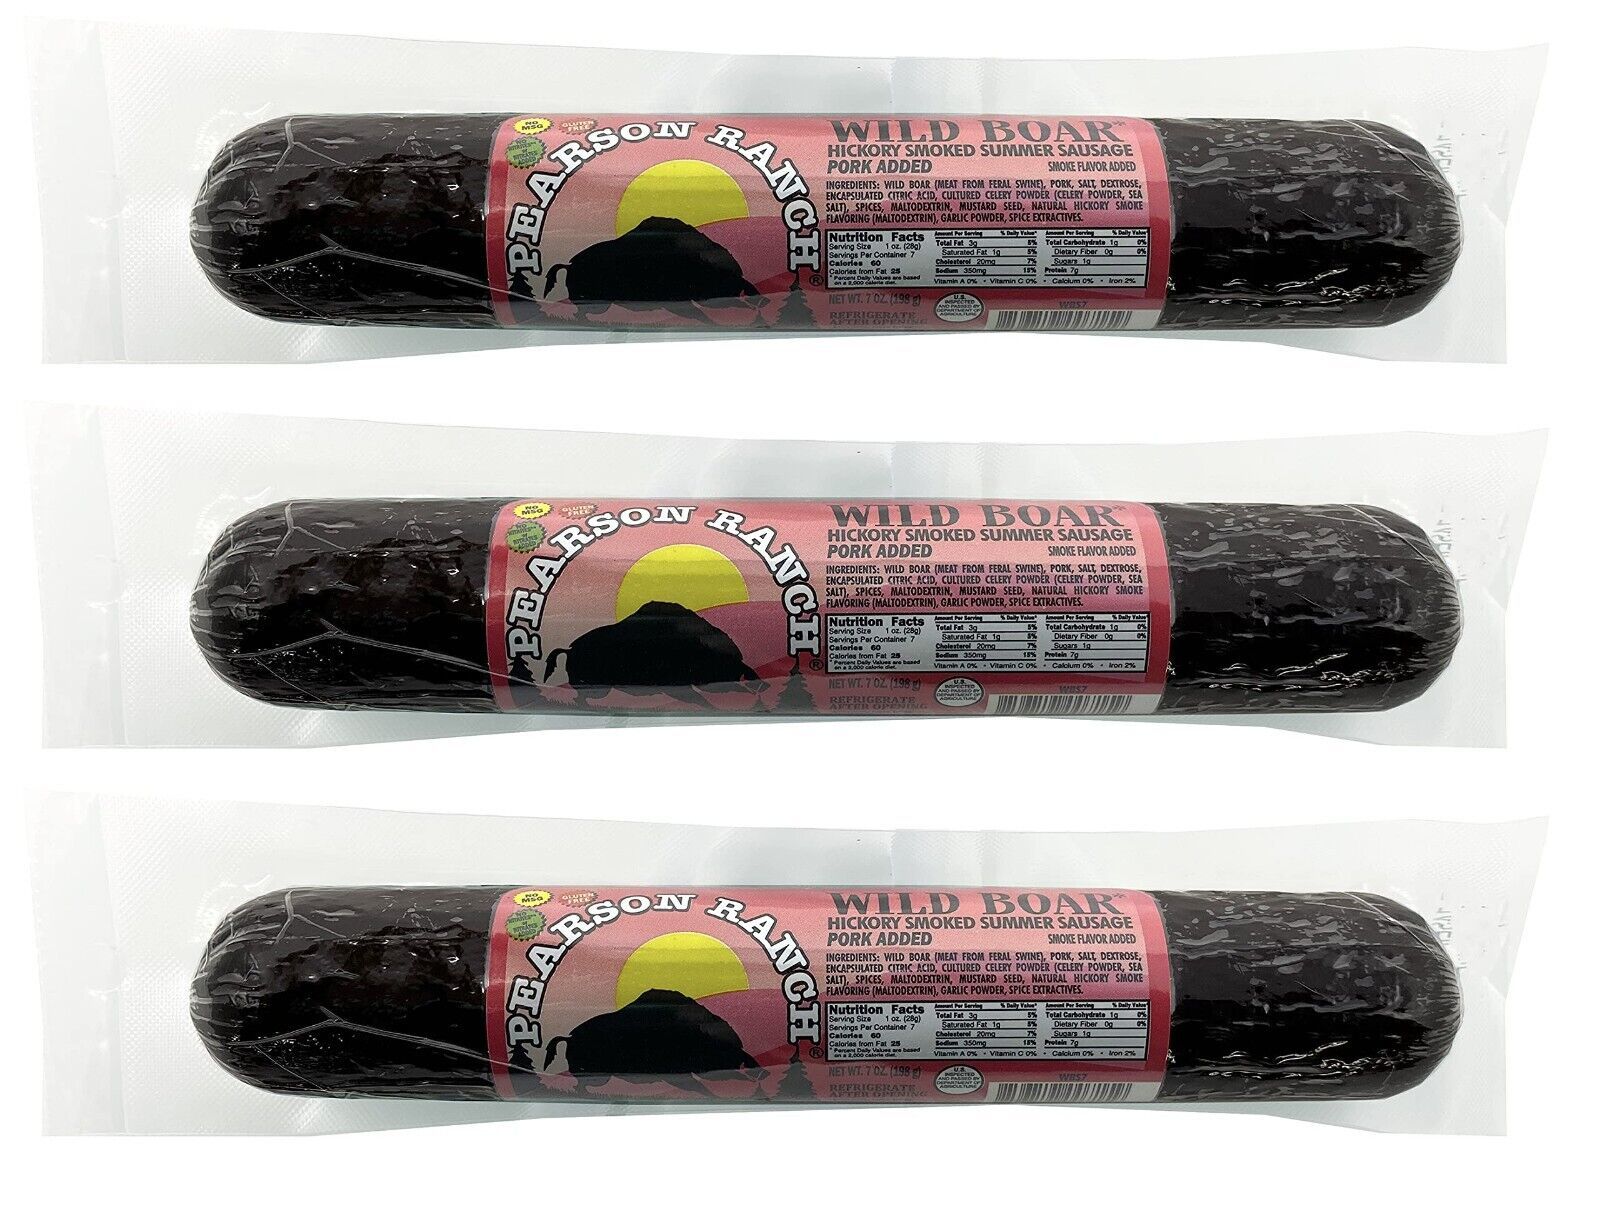 Primary image for Pearson Ranch Hickory Smoked Wild Game Boar Summer Sausage 7oz- Pack of 3